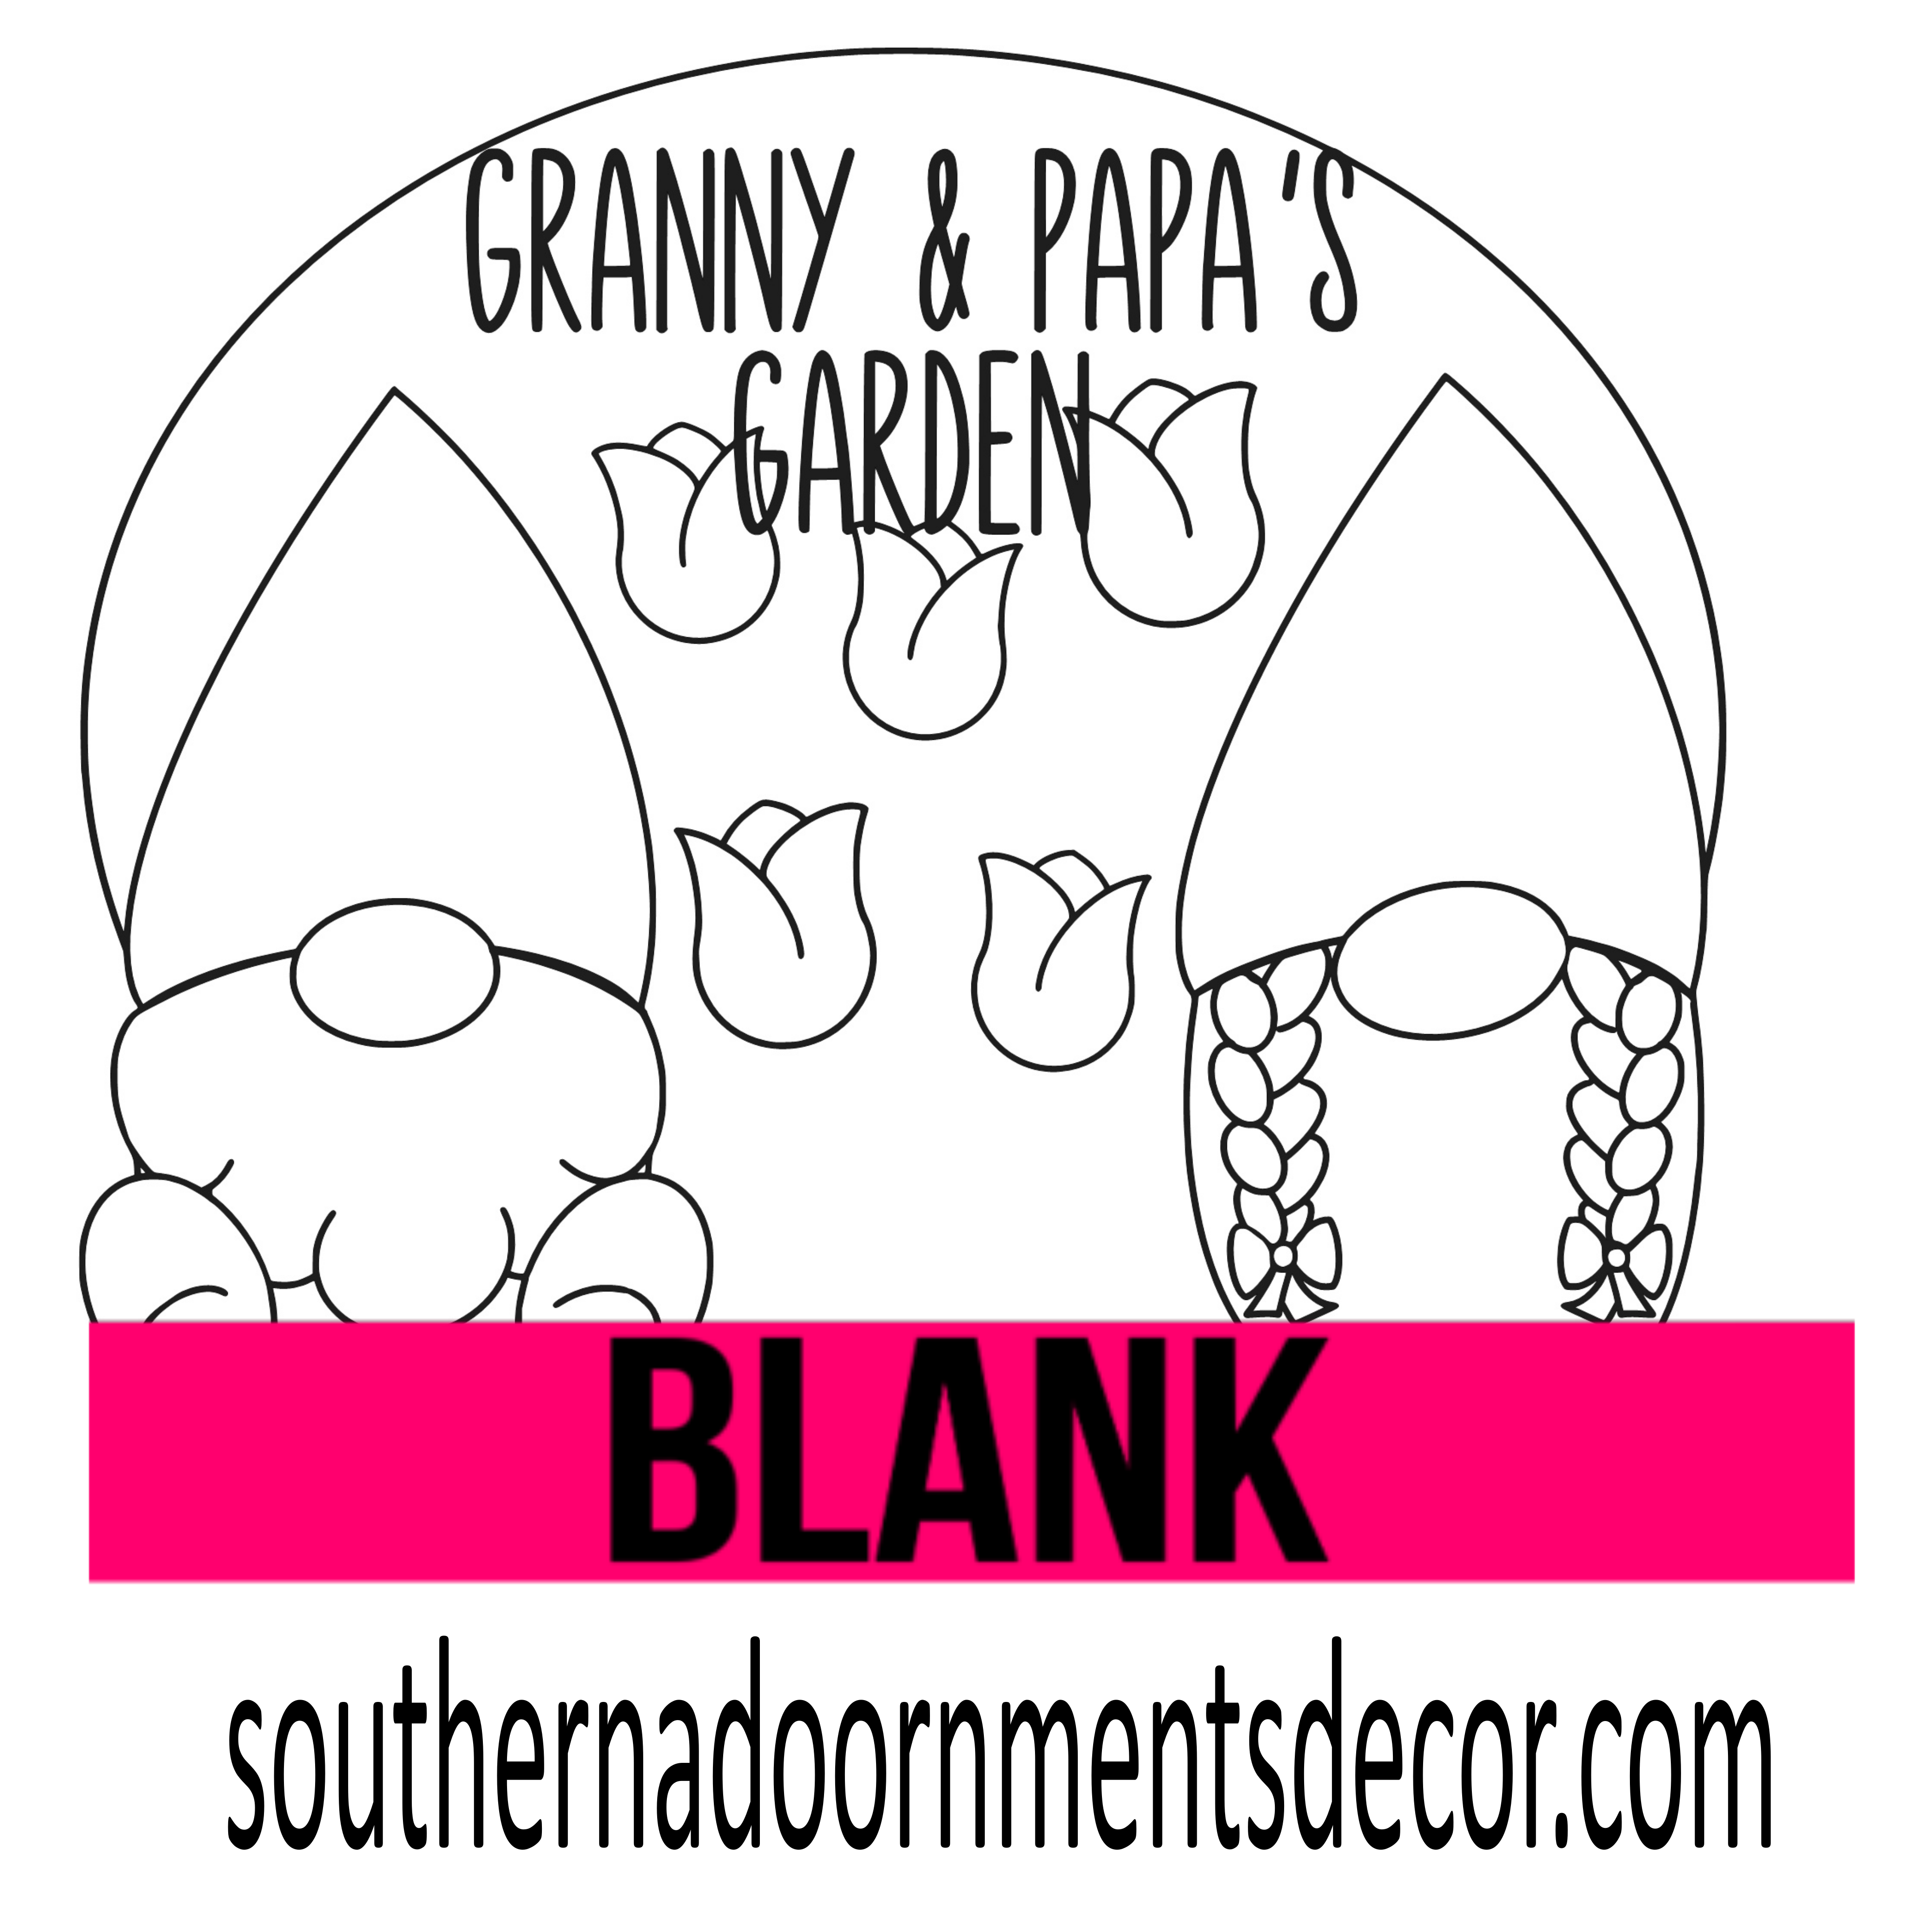 Granny & Papa's Gnome Garden Wood Cut Out Blank